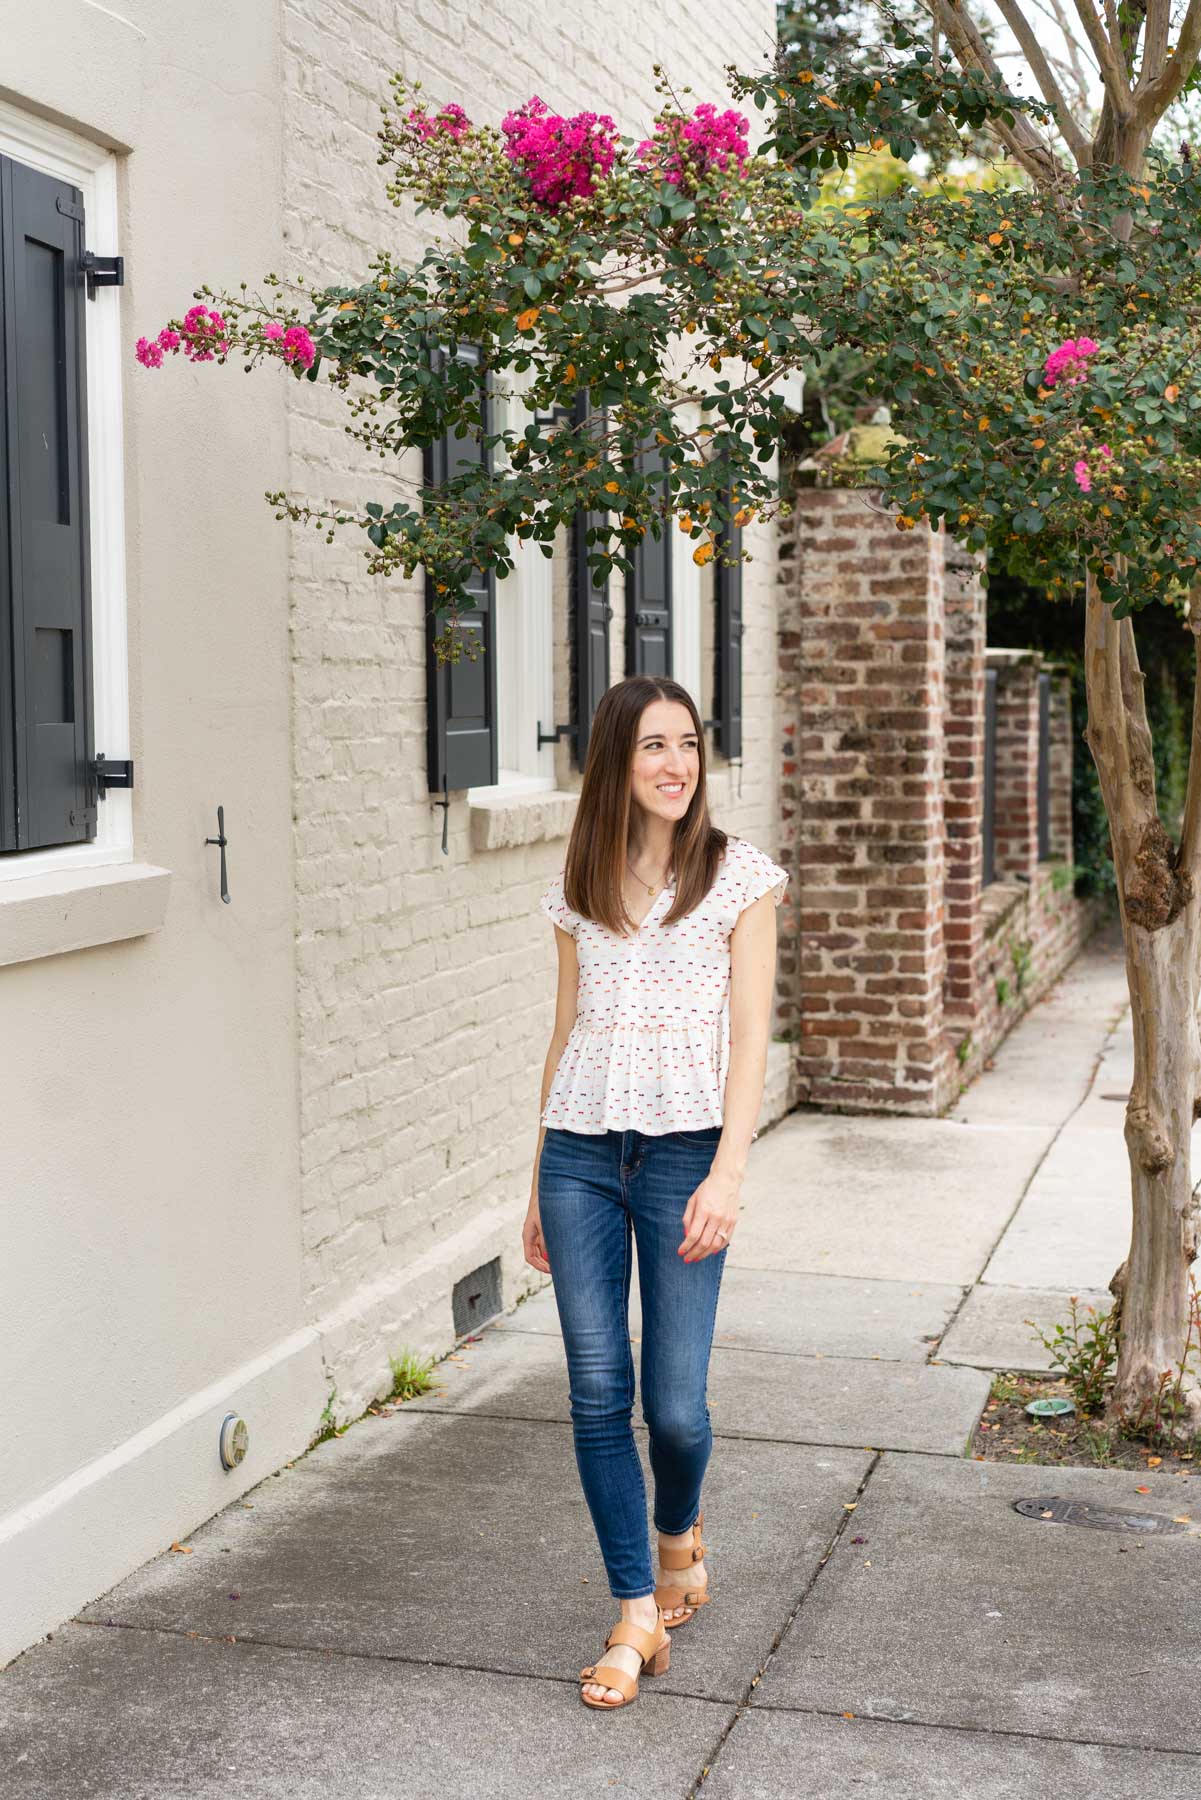 Woman in denim jeans and a white blouse demonstrating how to pose for a photoshoot by walking confidently down the sidewalk smiling and looking natural